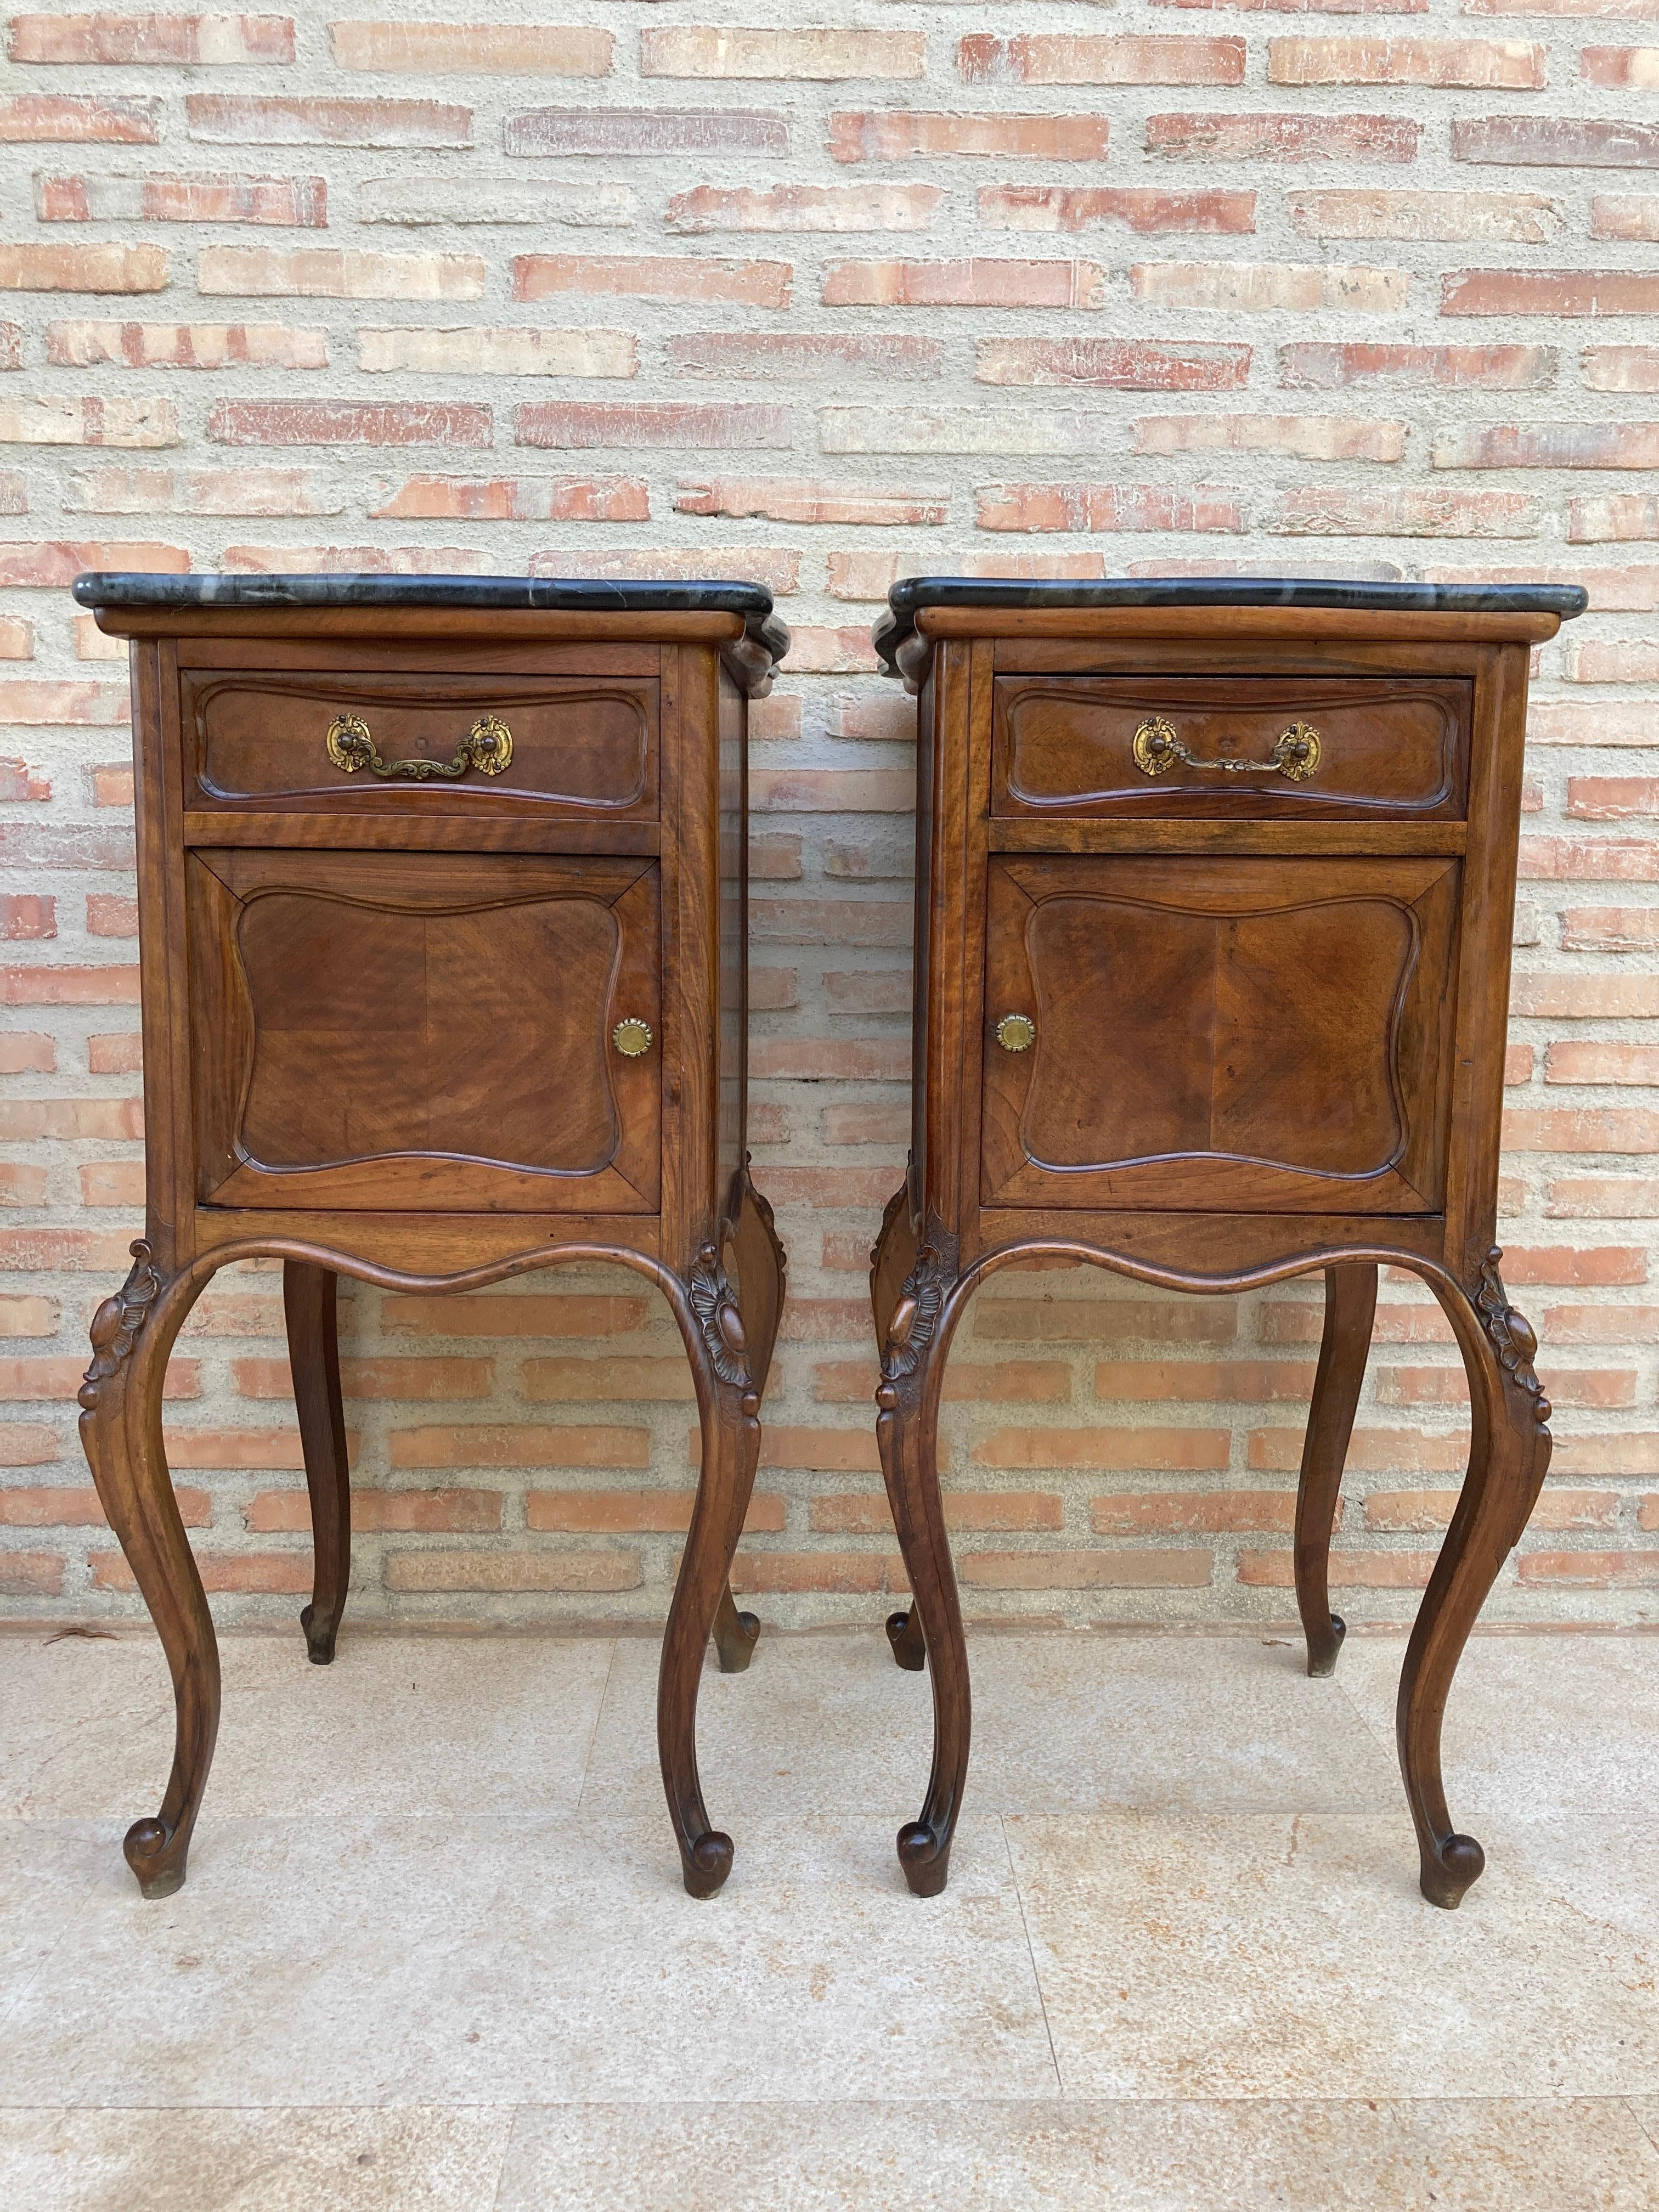 Pair of Louis XV style walnut nightstands with marble top, 1930s.
Beautiful pair of Louis XV style bedside tables, from the 30s.
They were made with walnut wood.
Its long spider legs will add a touch of elegance to your bedroom.
Each of them has